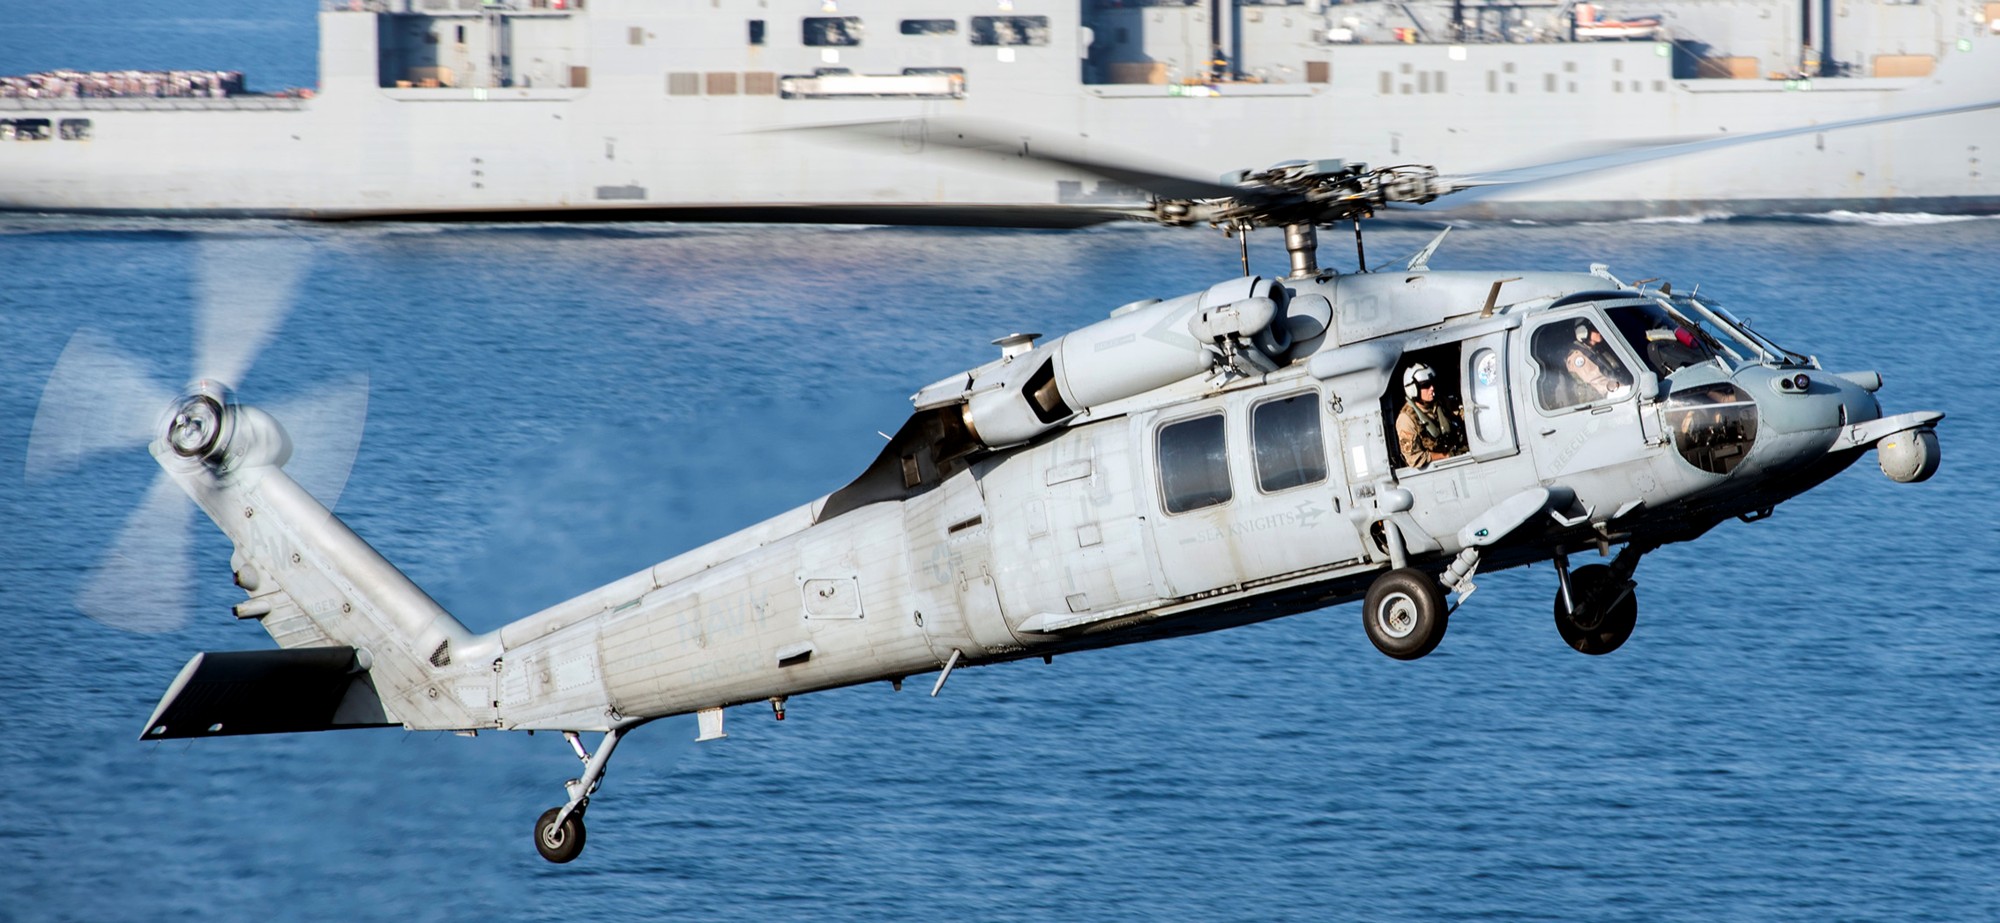 hsc-22 sea knights mh-60s seahawk us navy